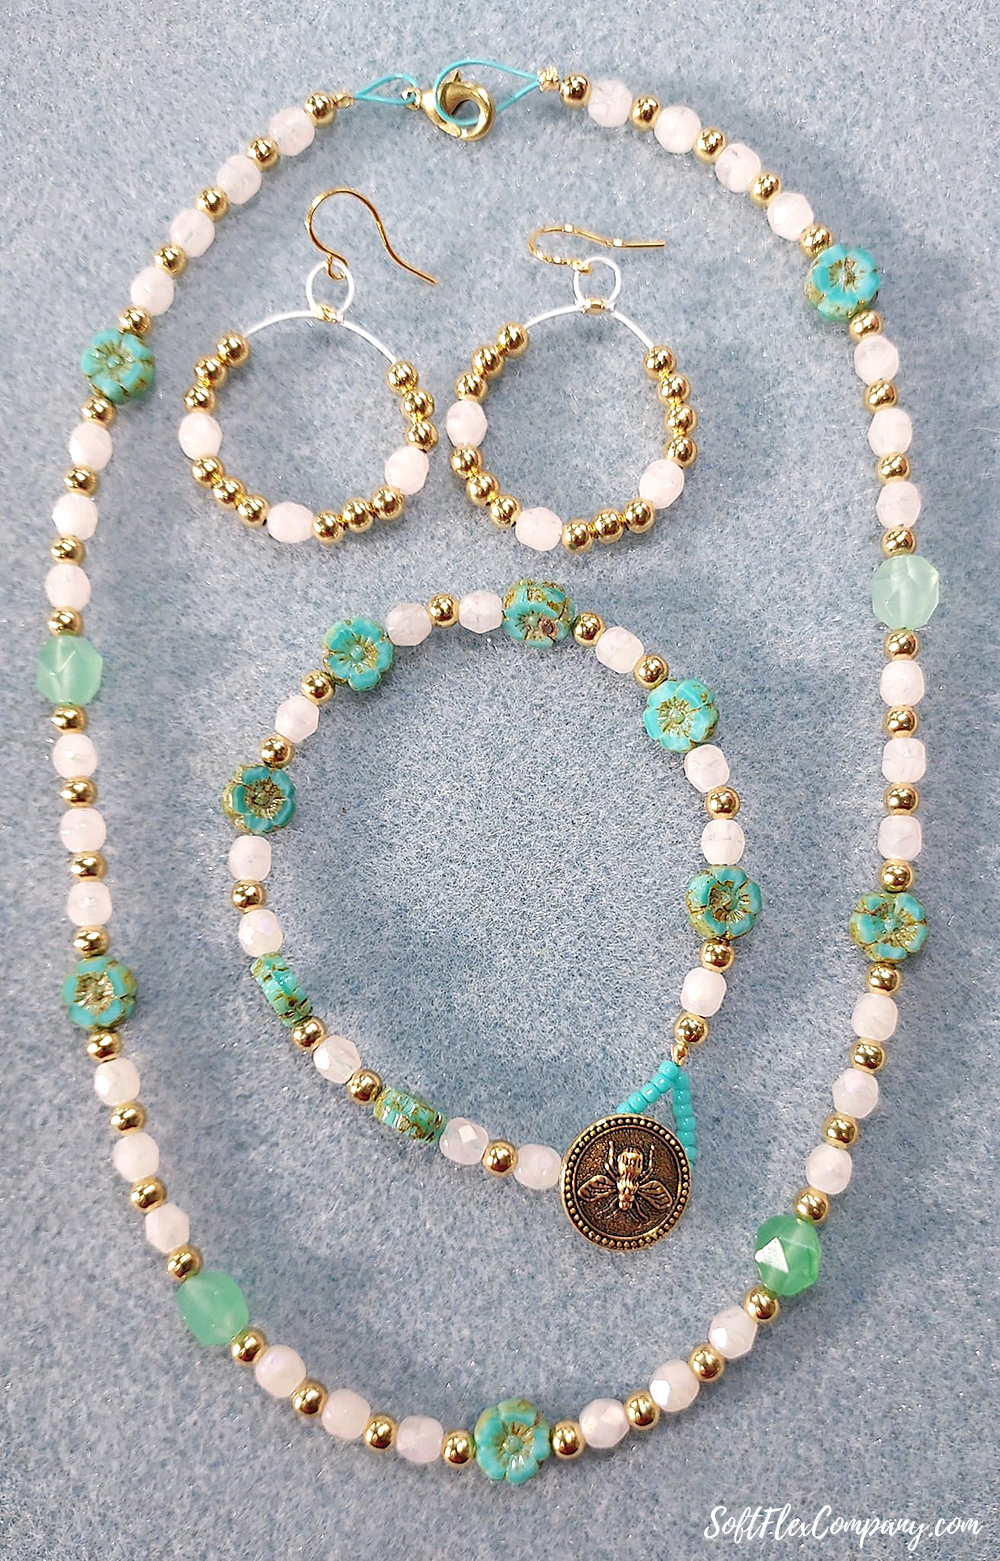 Pastel Party Jewelry by Carey Marshall Leimbach